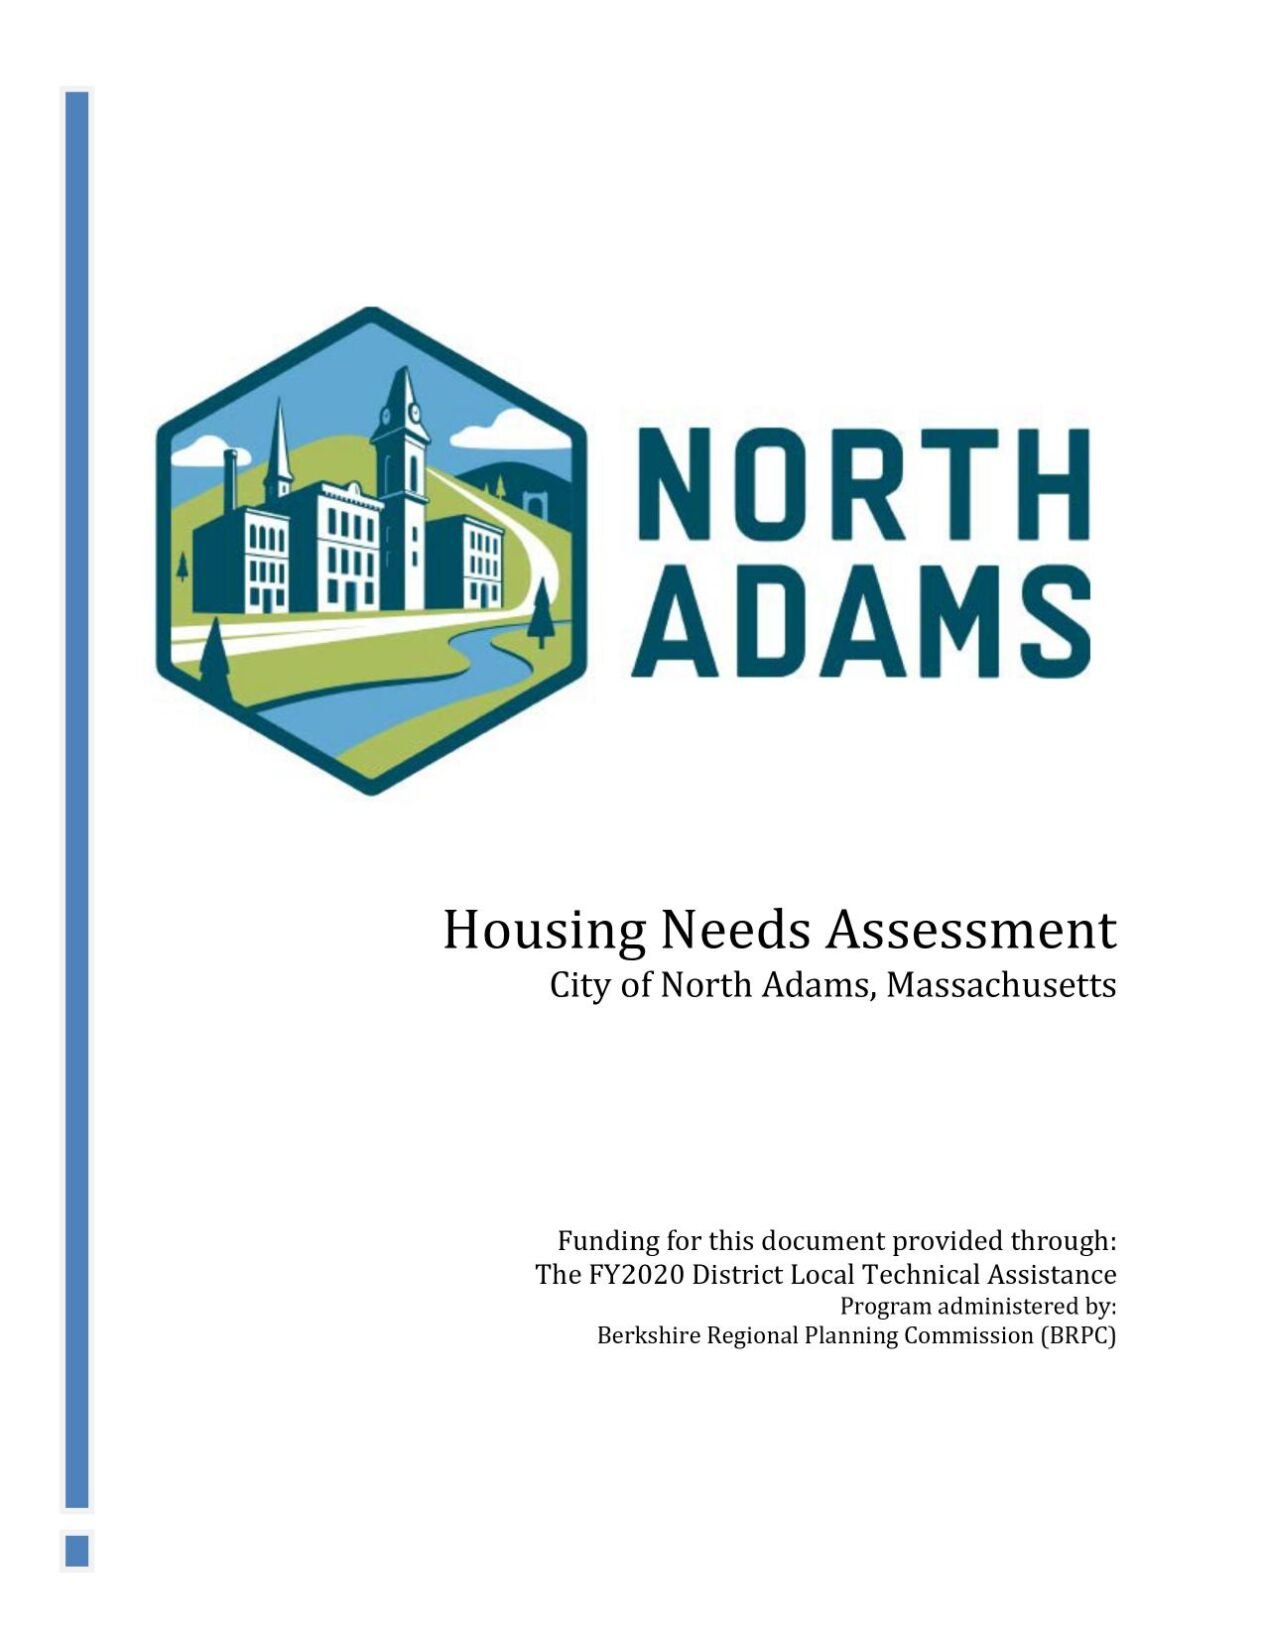 Housing assessment done on North Adams